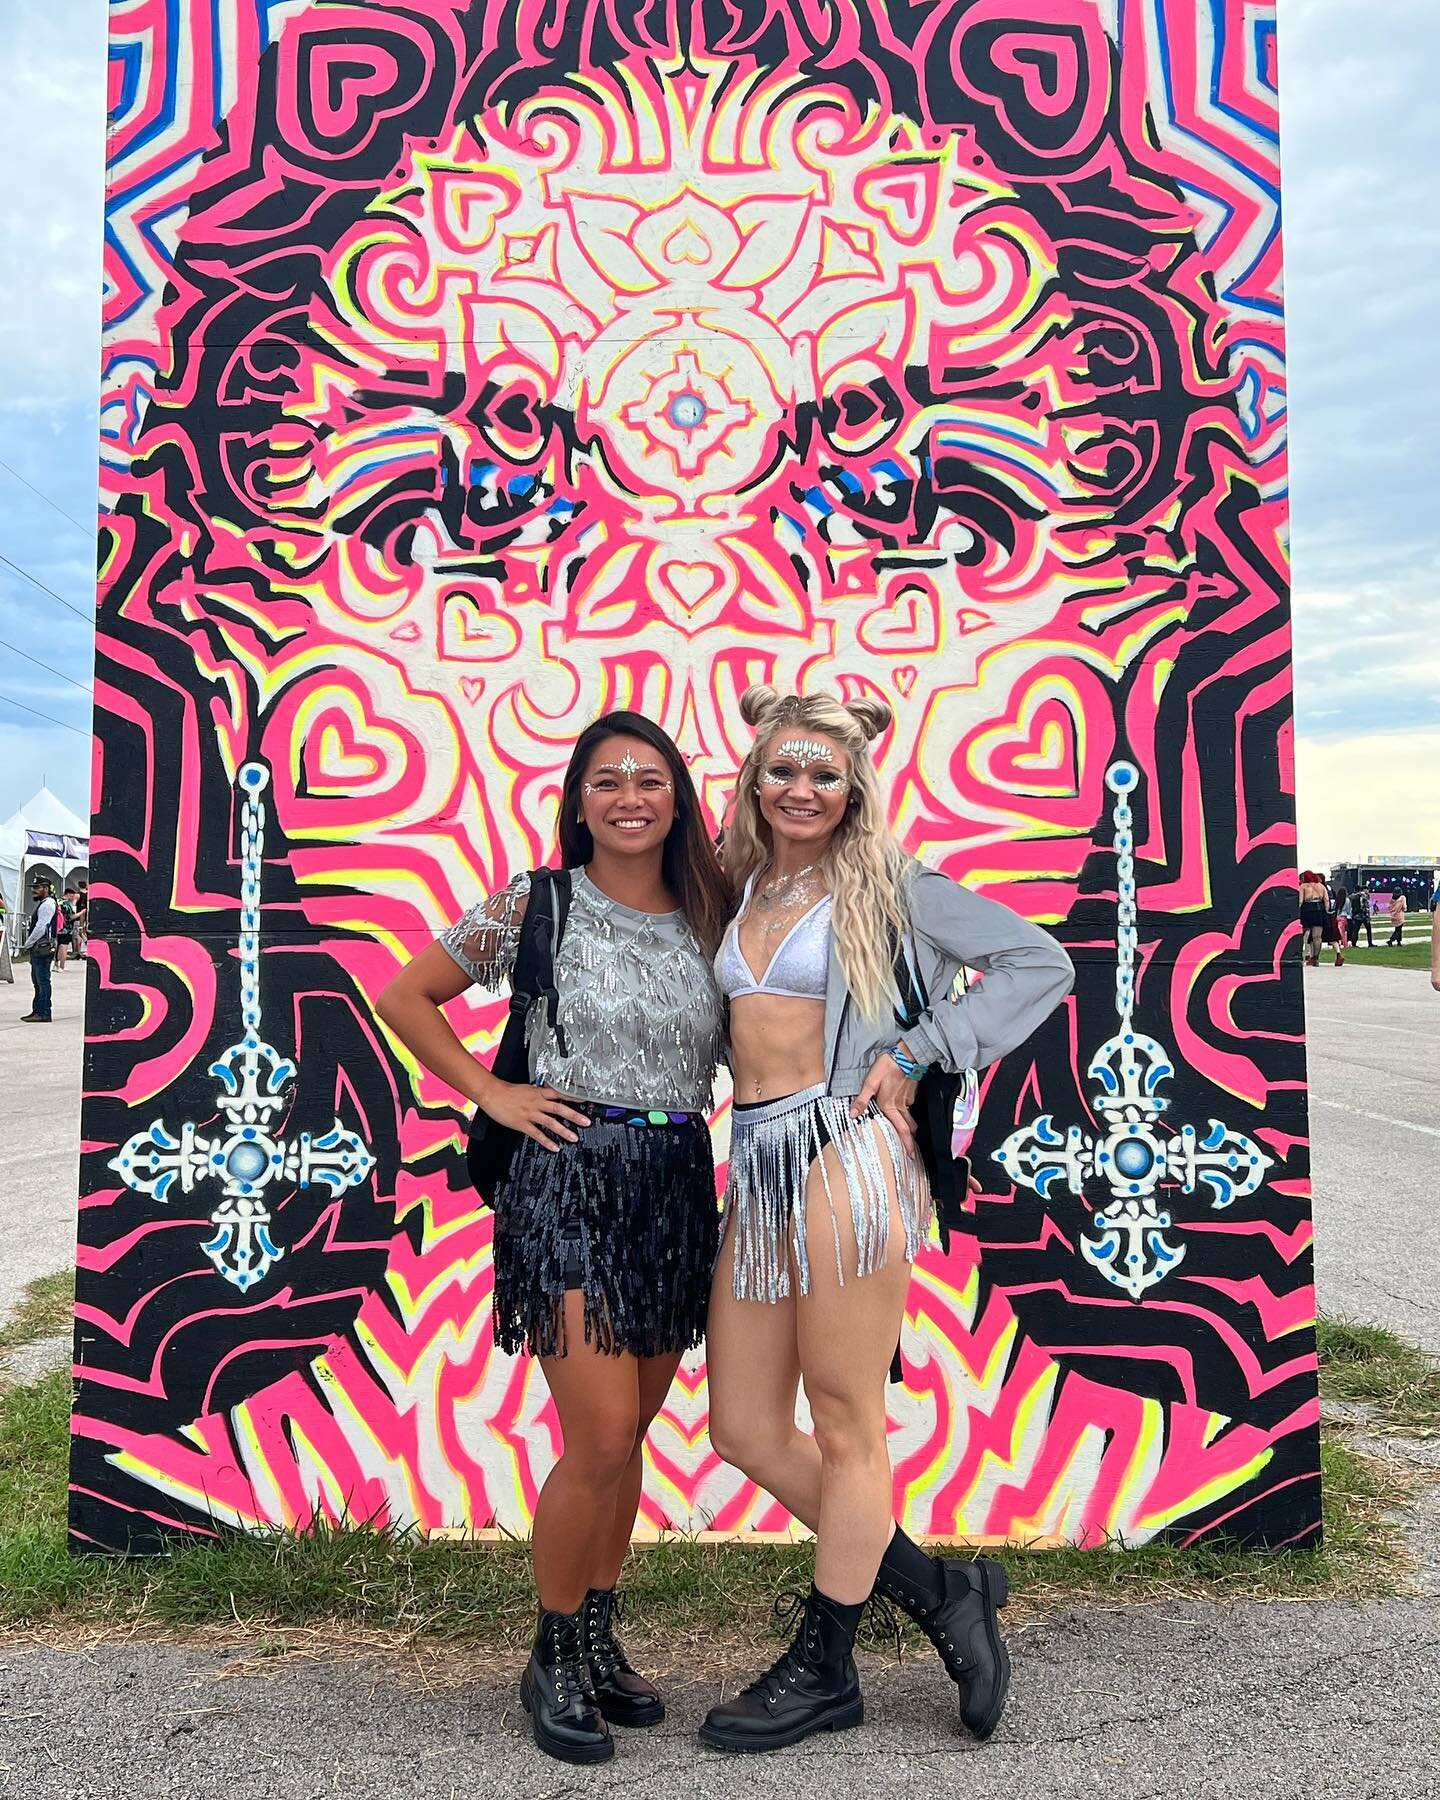 Got to enjoy Art and music @illfestatx. 

I've always enjoyed electronic music but never been to an electronic music festival - until yesterday!!

Thanks @des_fit7 for bringing me with you 😘😘😘